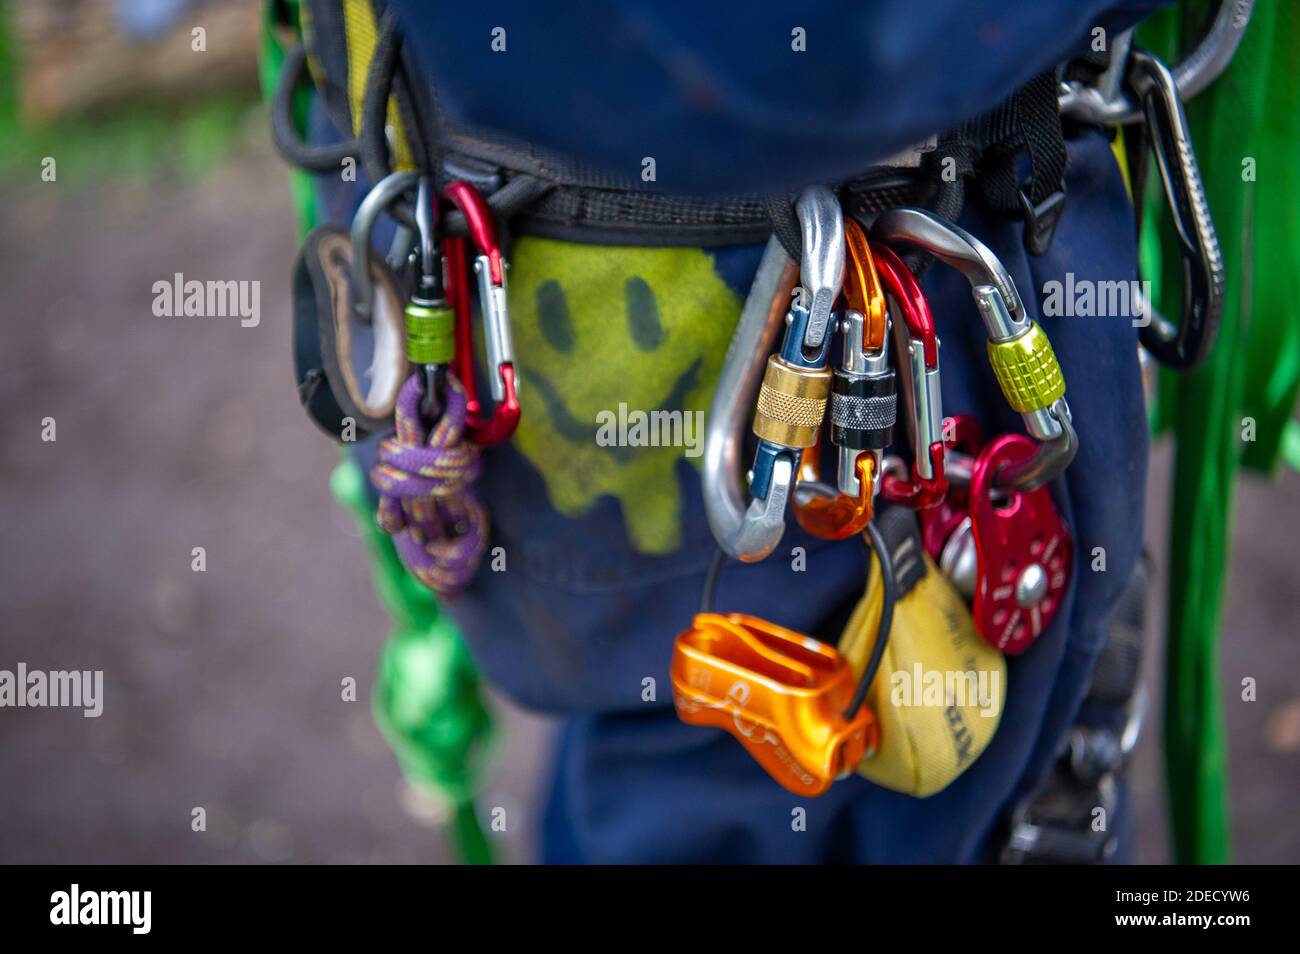 Denham, Buckinghamshire, UK. 27th November, 2020. A young male anti HS2 environmental activist's climbing gear. They are trying to protect the trees from the chainsaws of HS2. The controversial High Speed rail puts 693 wildlife sites, 33 SSSIs and 108 ancient woodlands at risk. Credit: Maureen McLean/Alamy Stock Photo